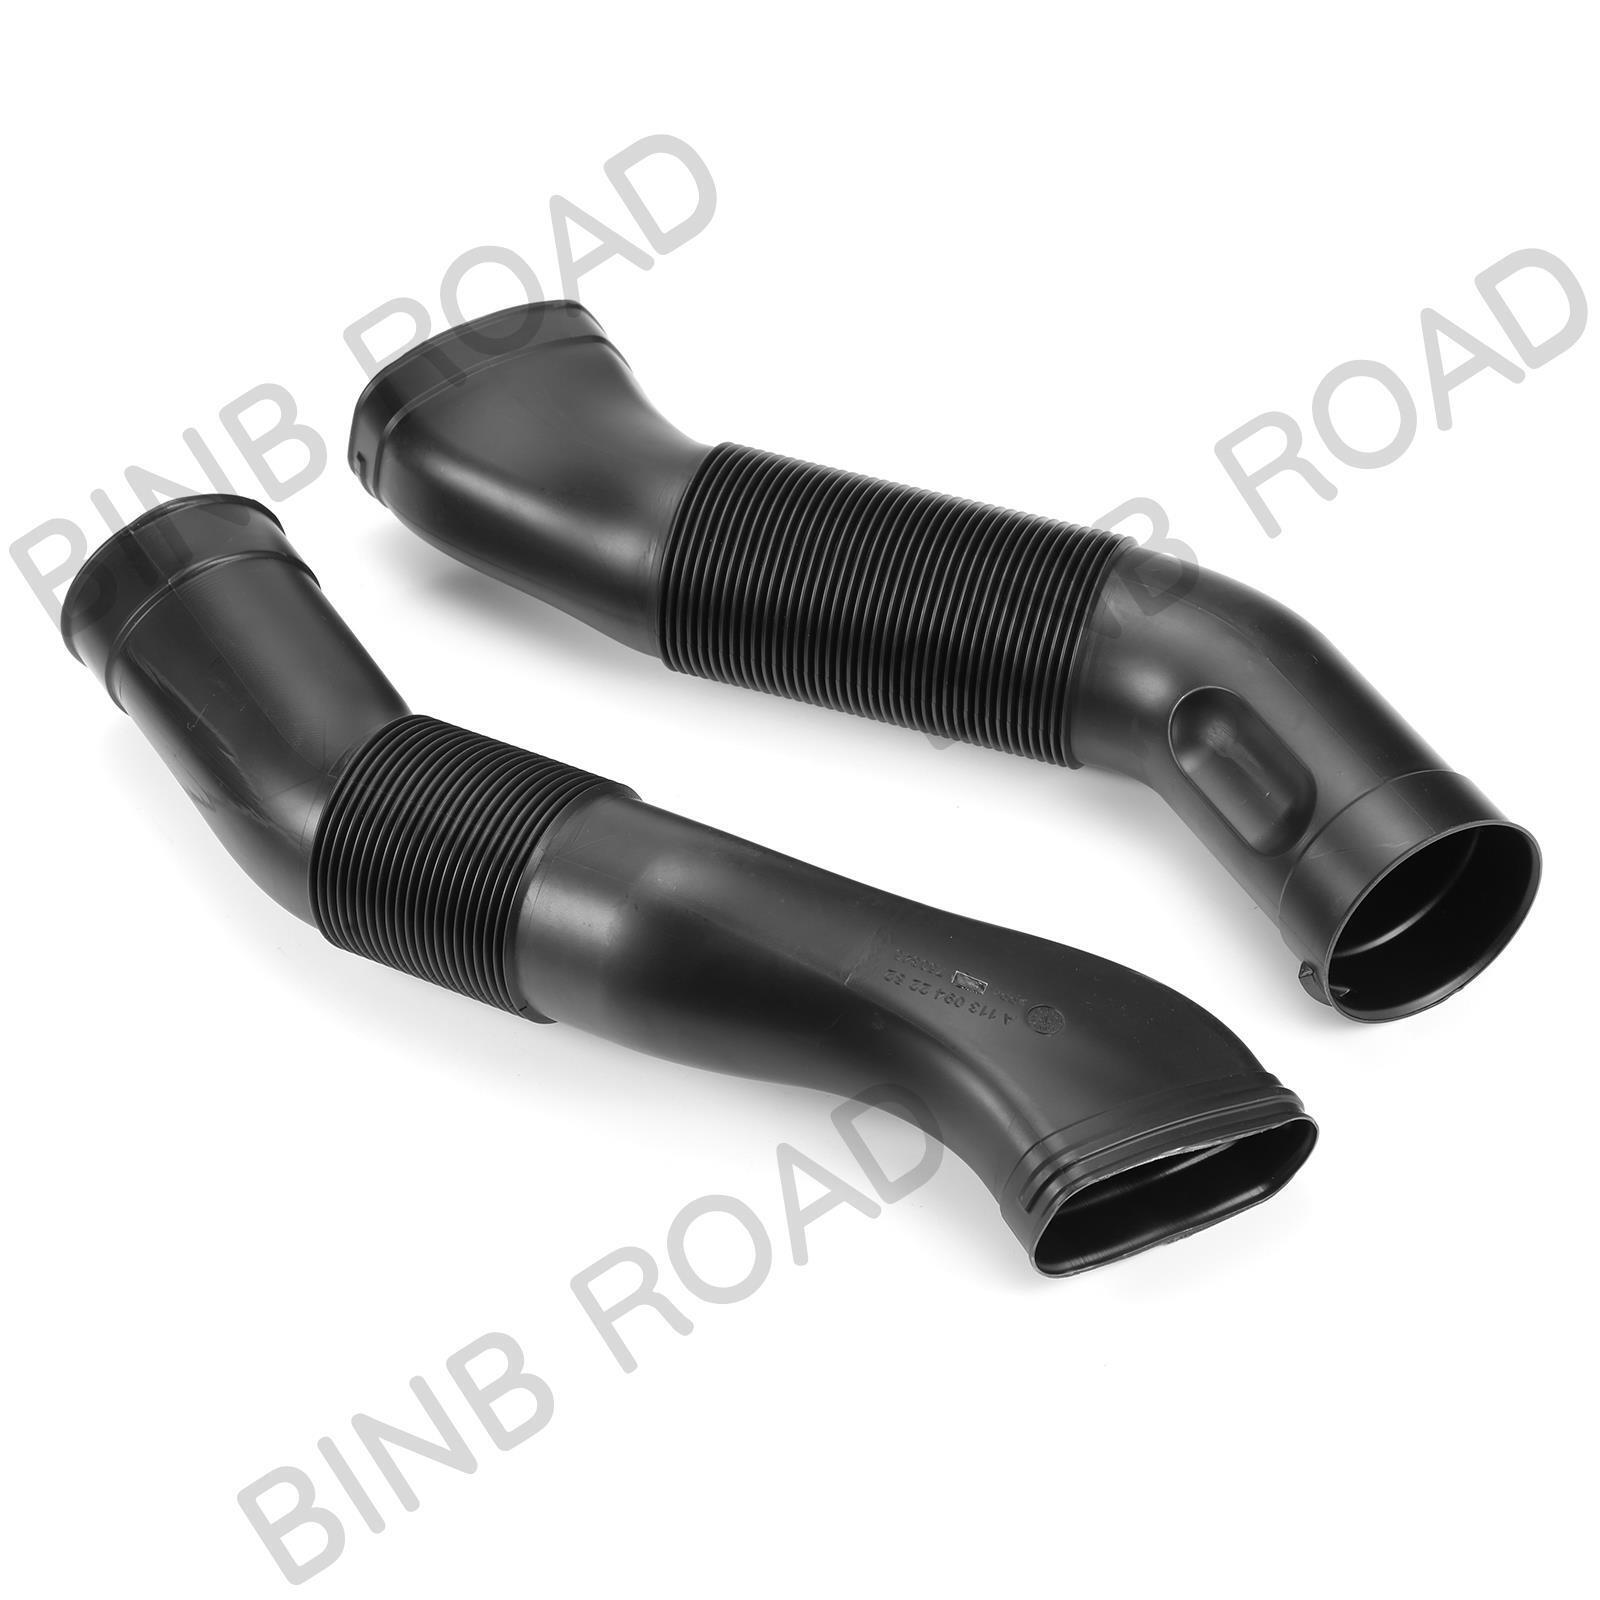 1 set Left and right side Air Intake Duct hose for Mercedes W211 CLS500 E500 E55